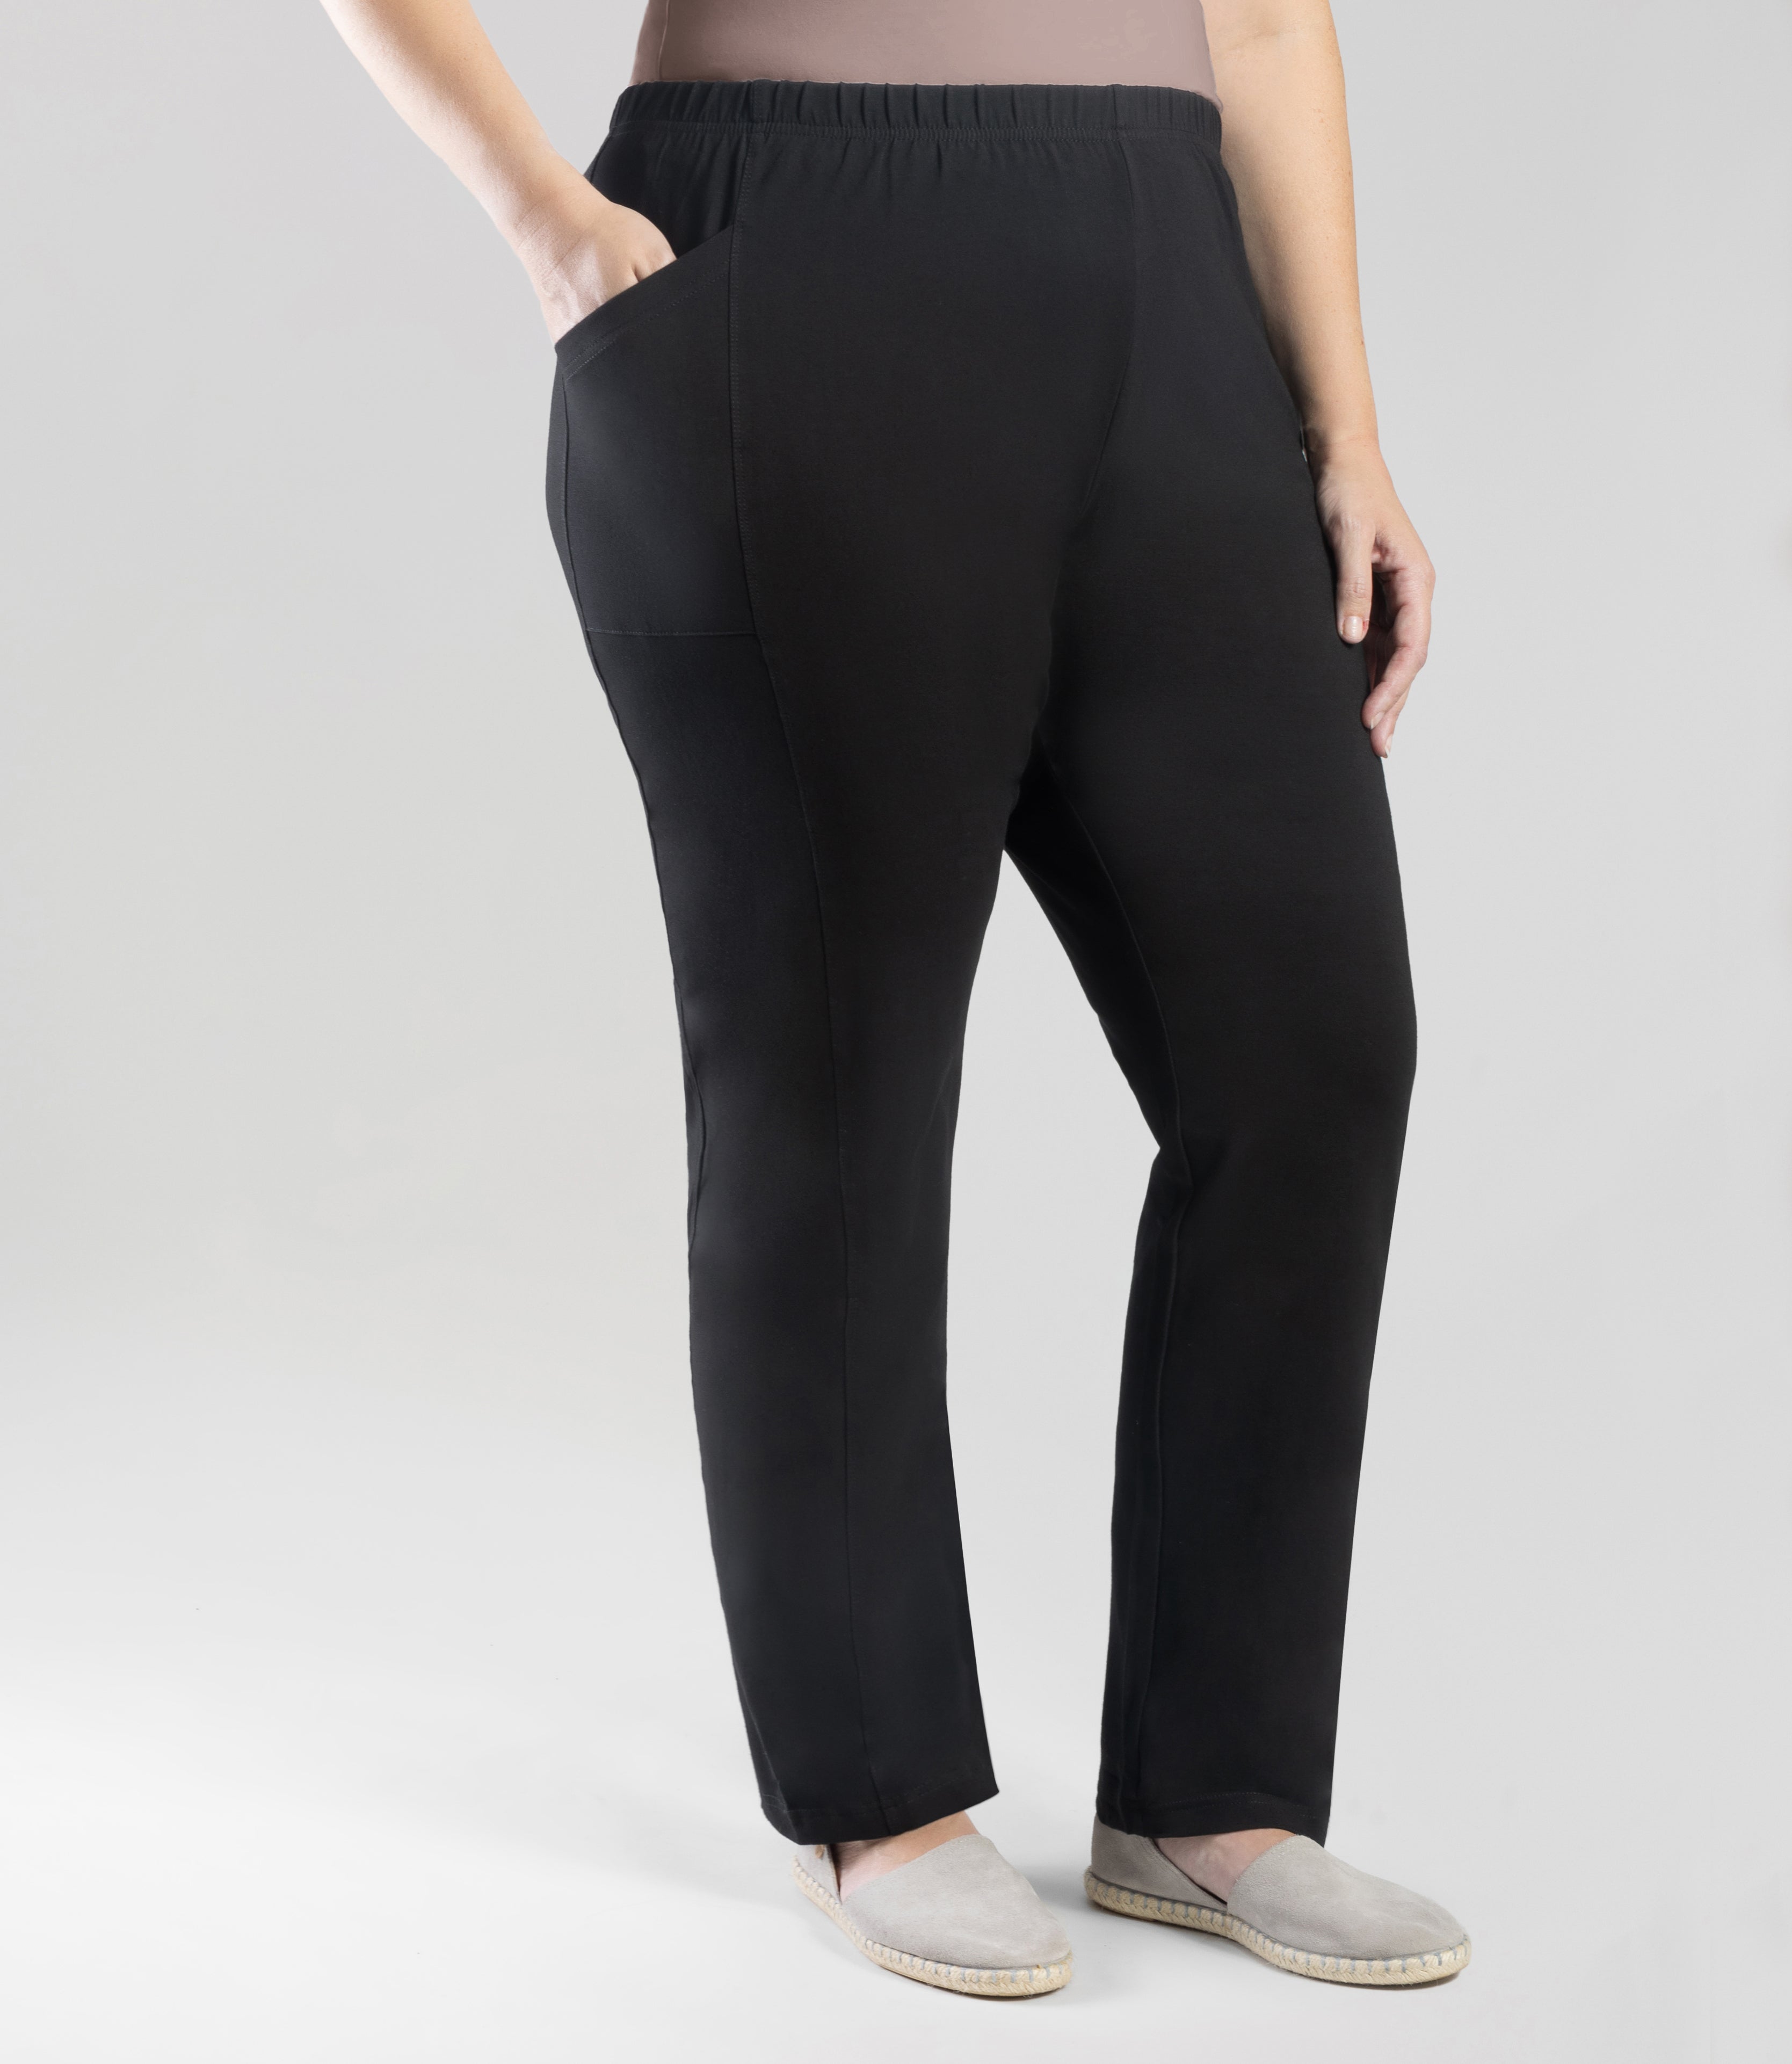 loose leggings with pockets, loose leggings with pockets Suppliers and  Manufacturers at